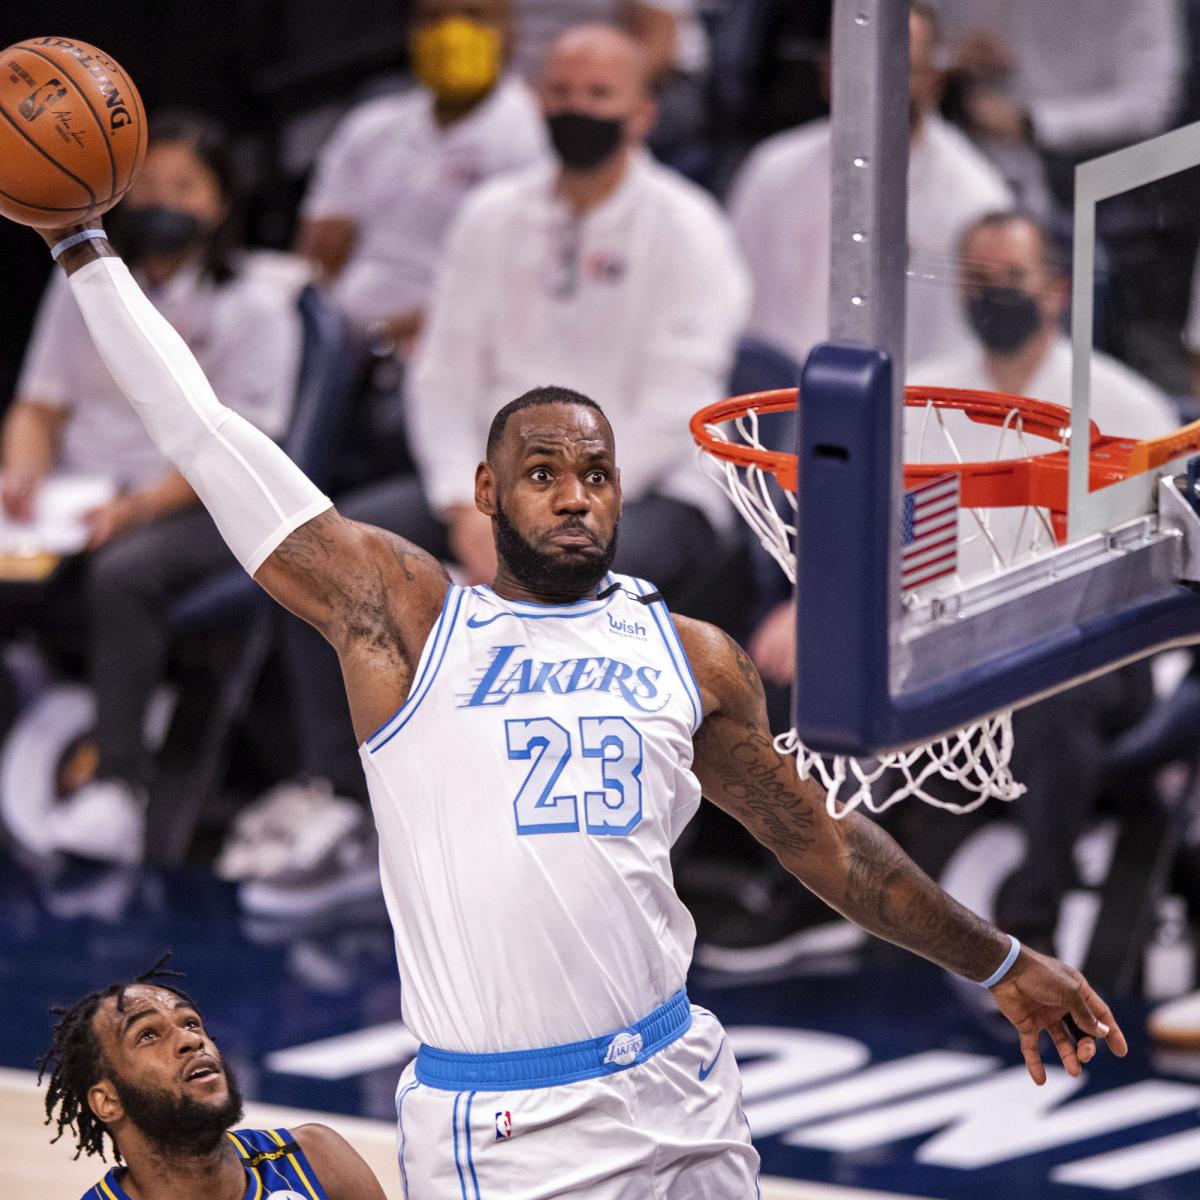 NBA Playoff Picture 2021: Latest Play-in Bracket, Seeding Scenarios for